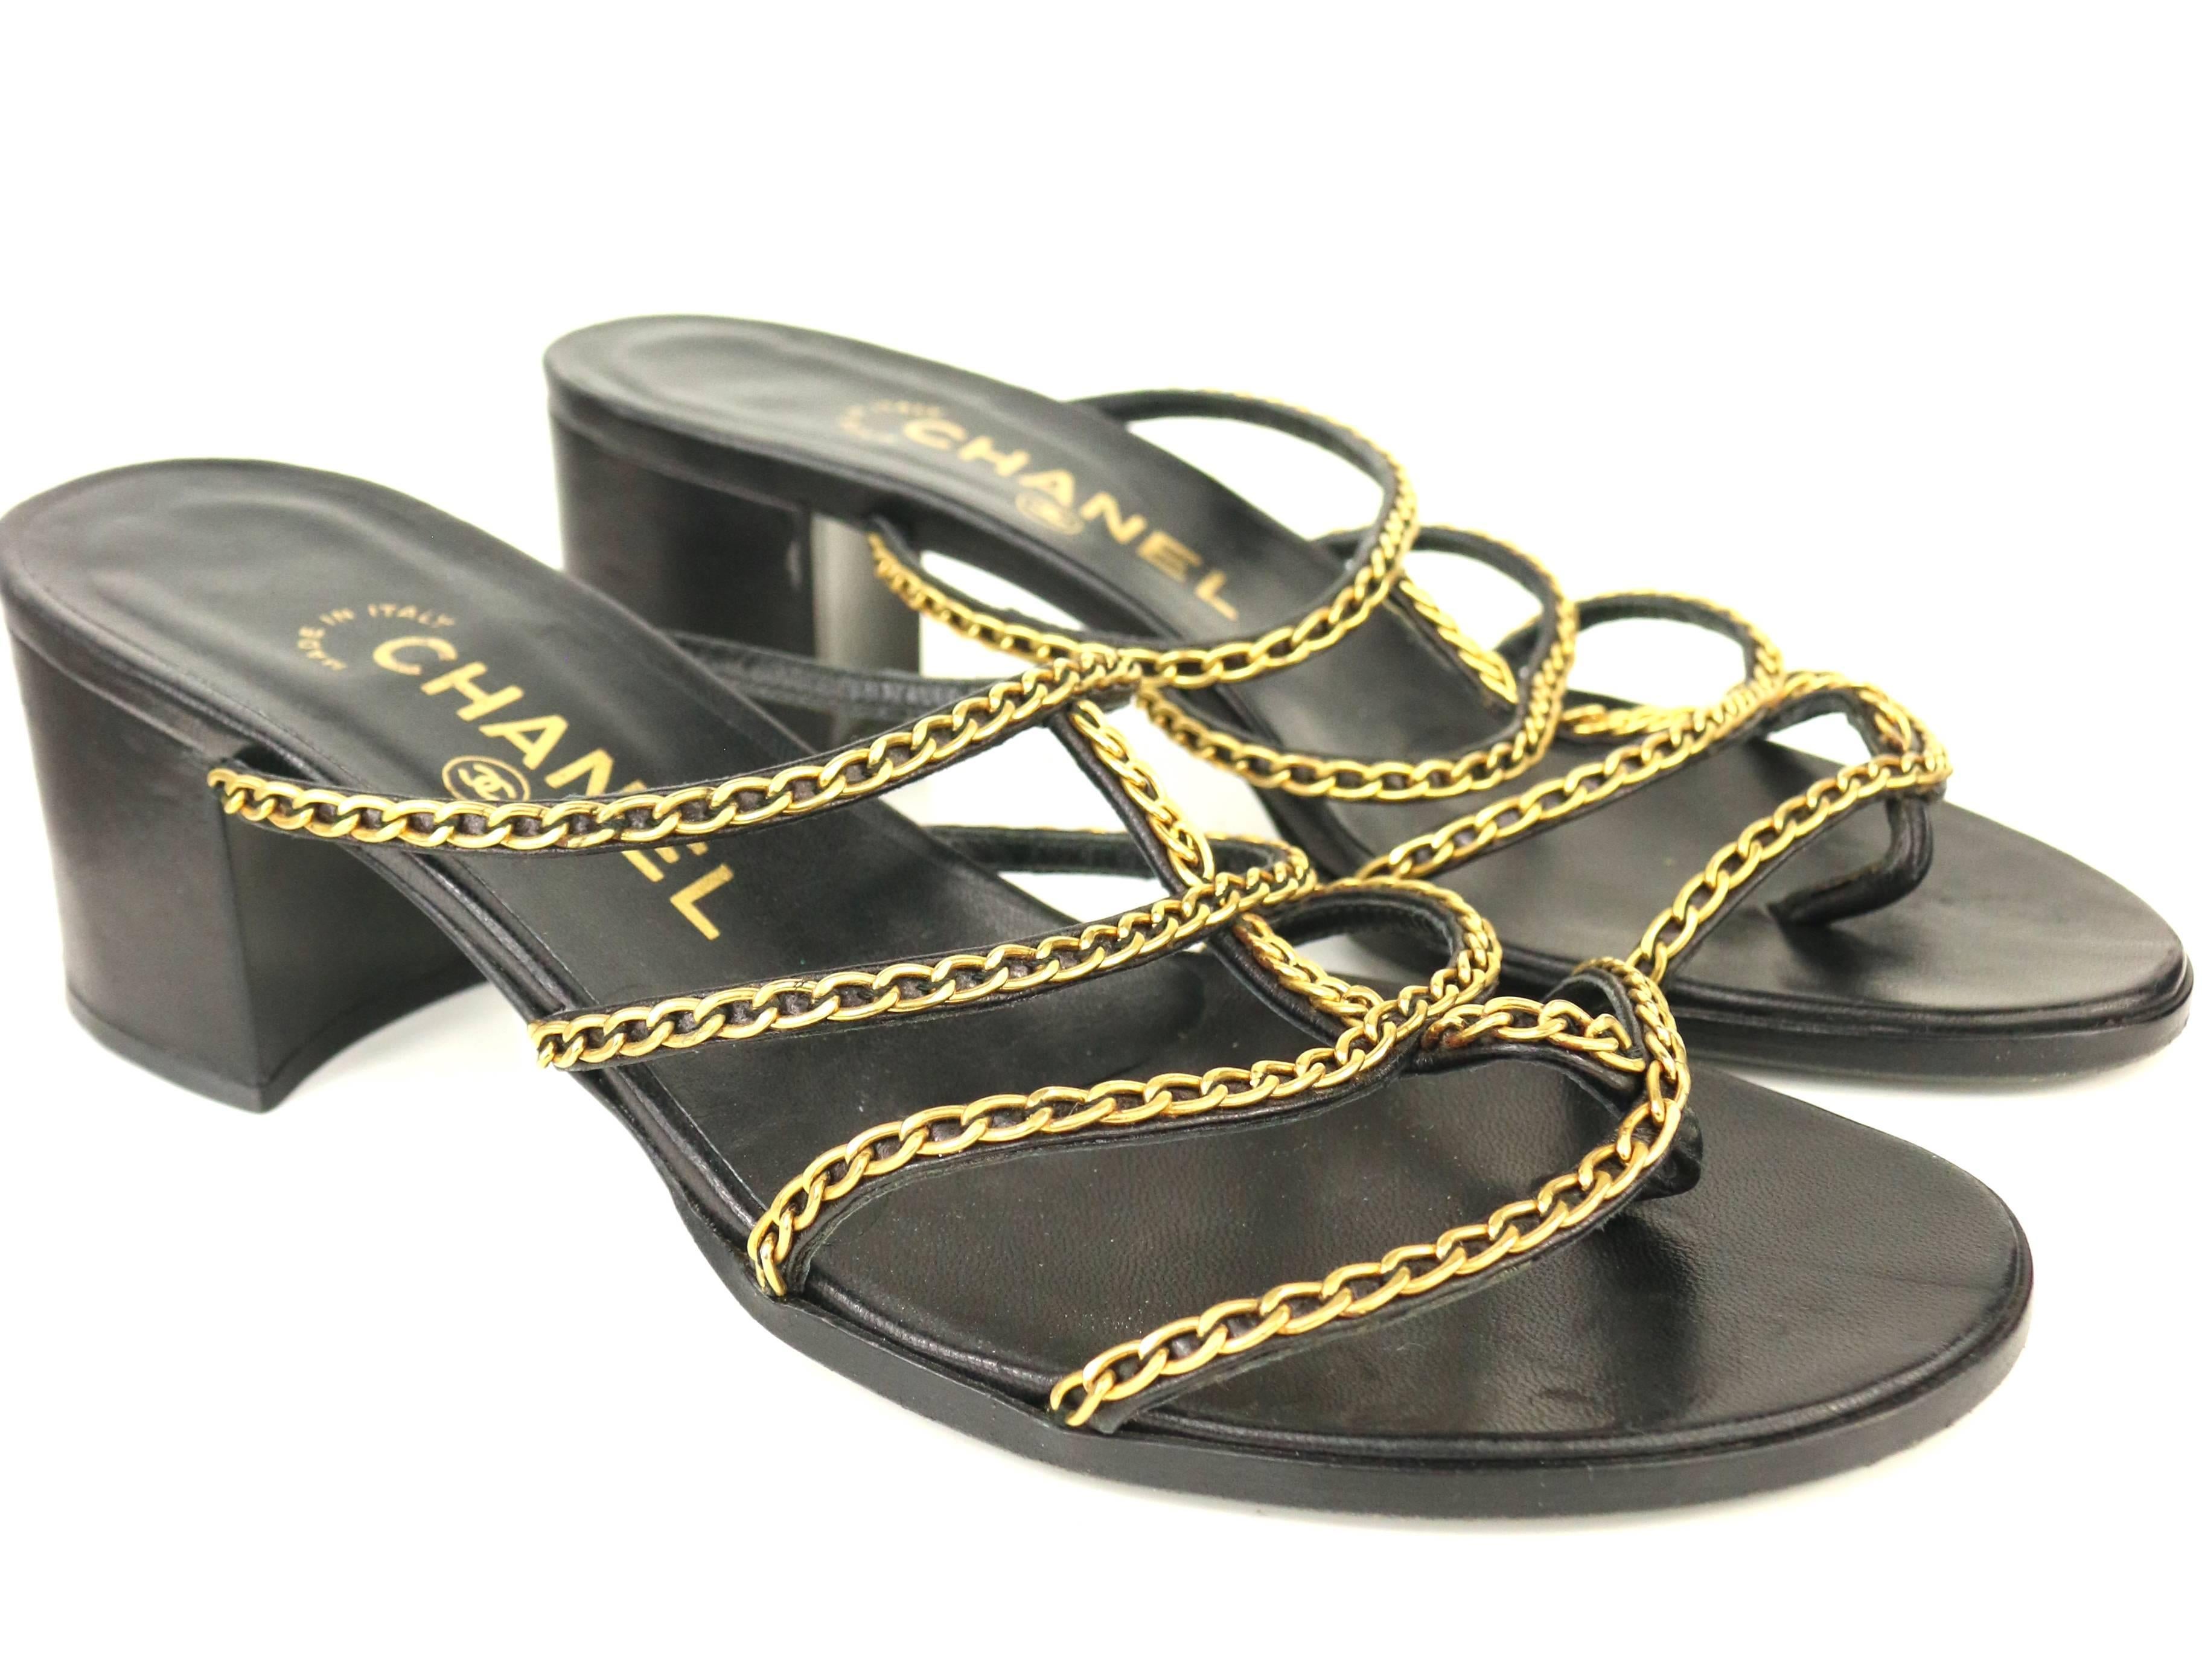 - Vintage 90s Chanel black leather gold chain sandals with heels. 

- Open toes. 

- Size: 37.5. 

- Condition: Excellent. Please note that this is a vintage item, there might be minor imperfection.

